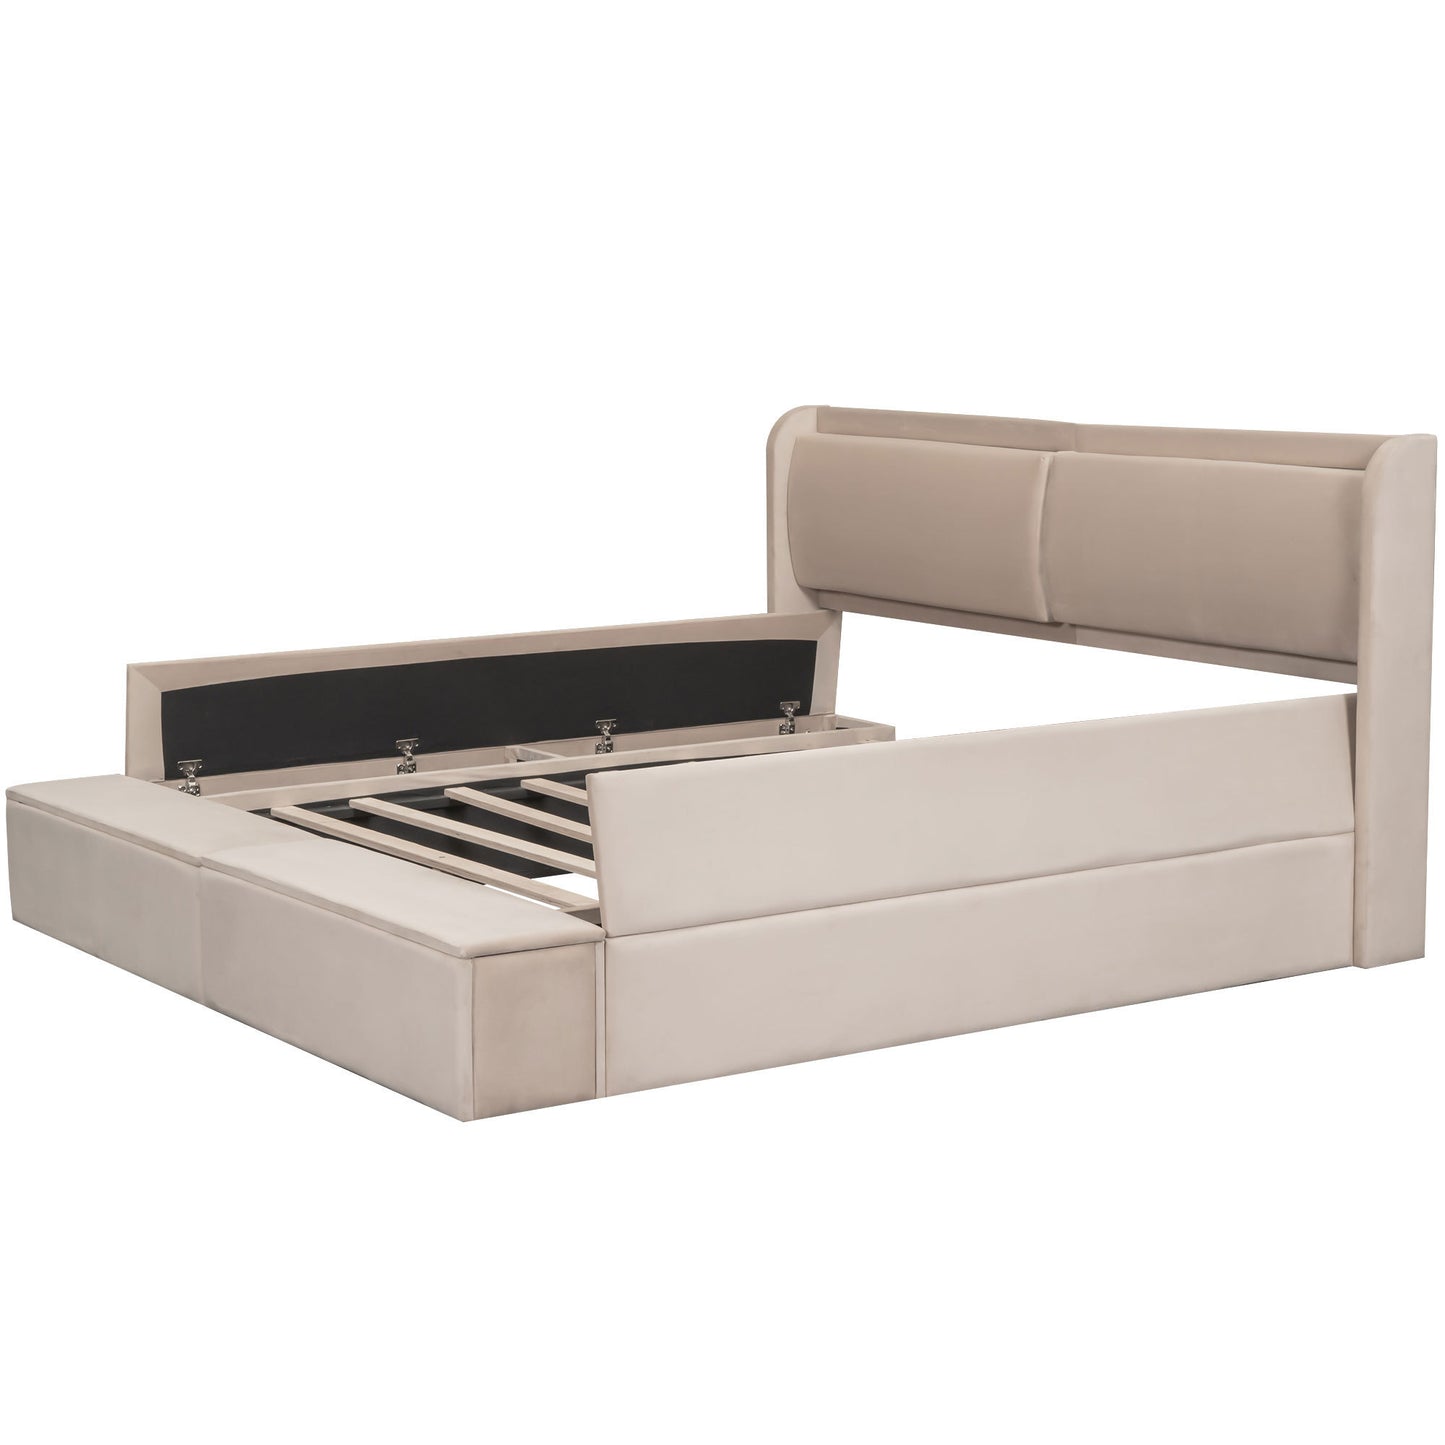 Queen Size Upholstery Storage Platform Bed with Storage Space on both Sides and Footboard, Beige